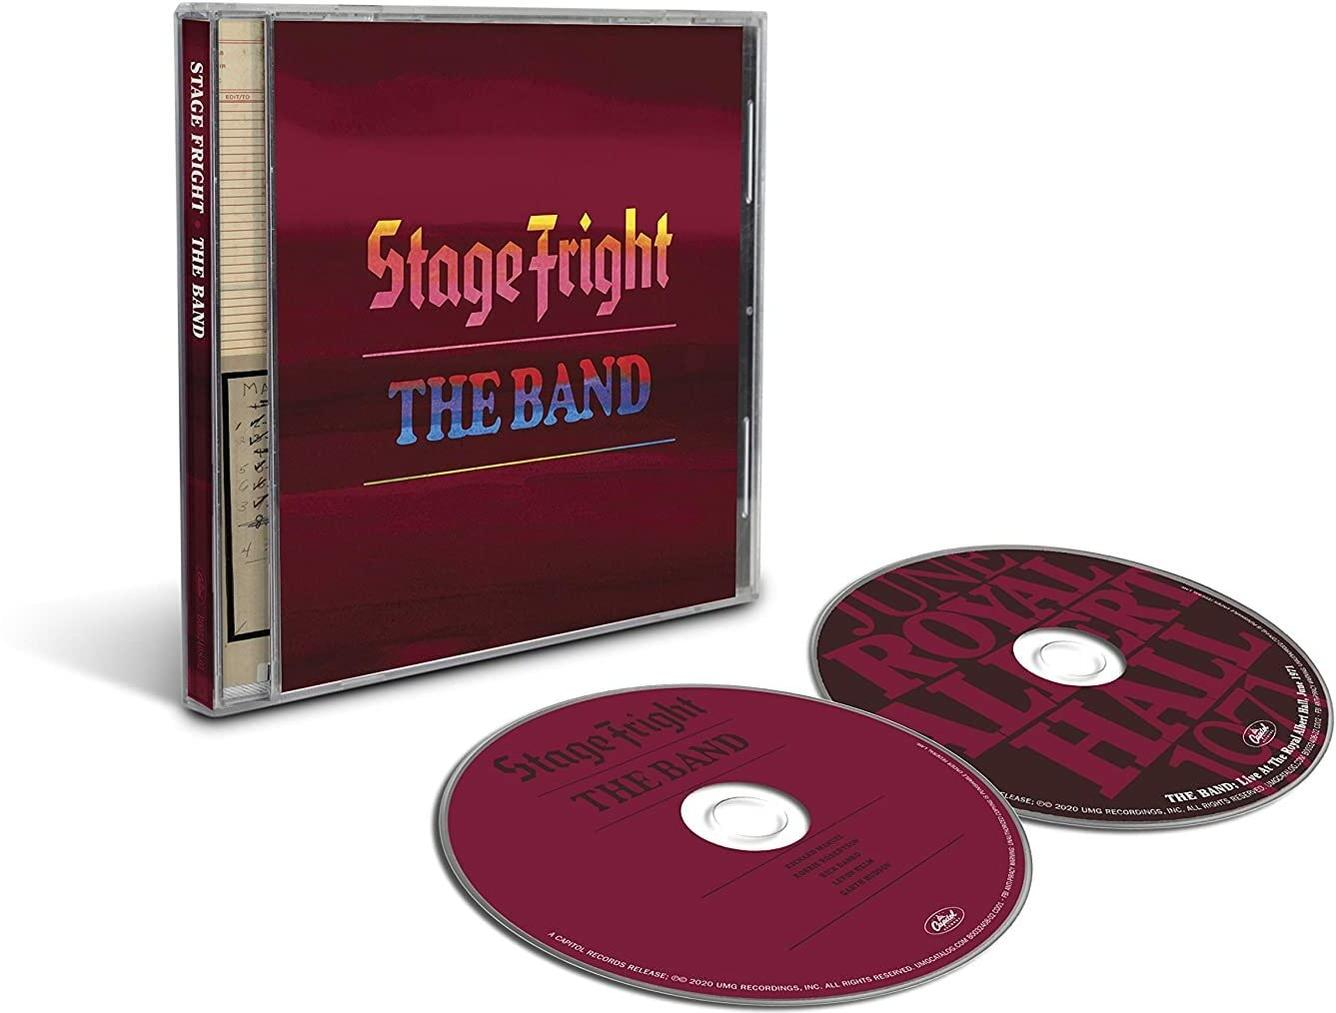 Band - Fright Stage The (CD) -